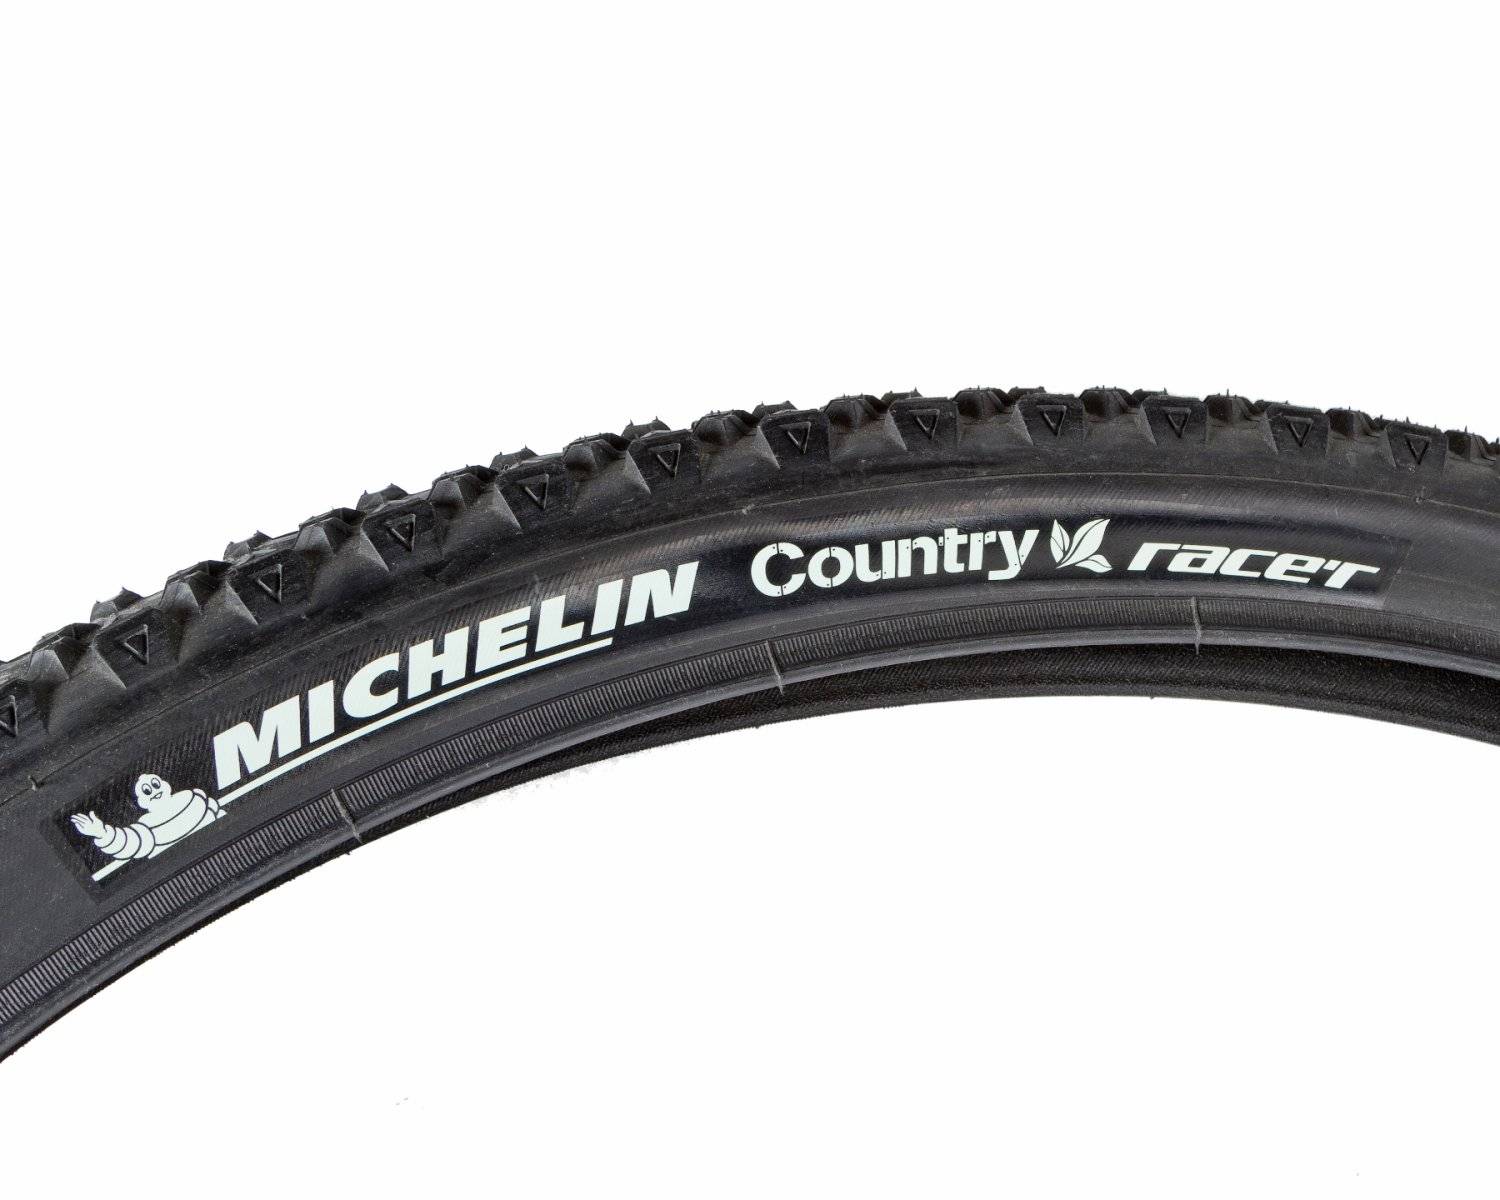 Country racing. Покрышка Michelin Country Race`r 54-622.